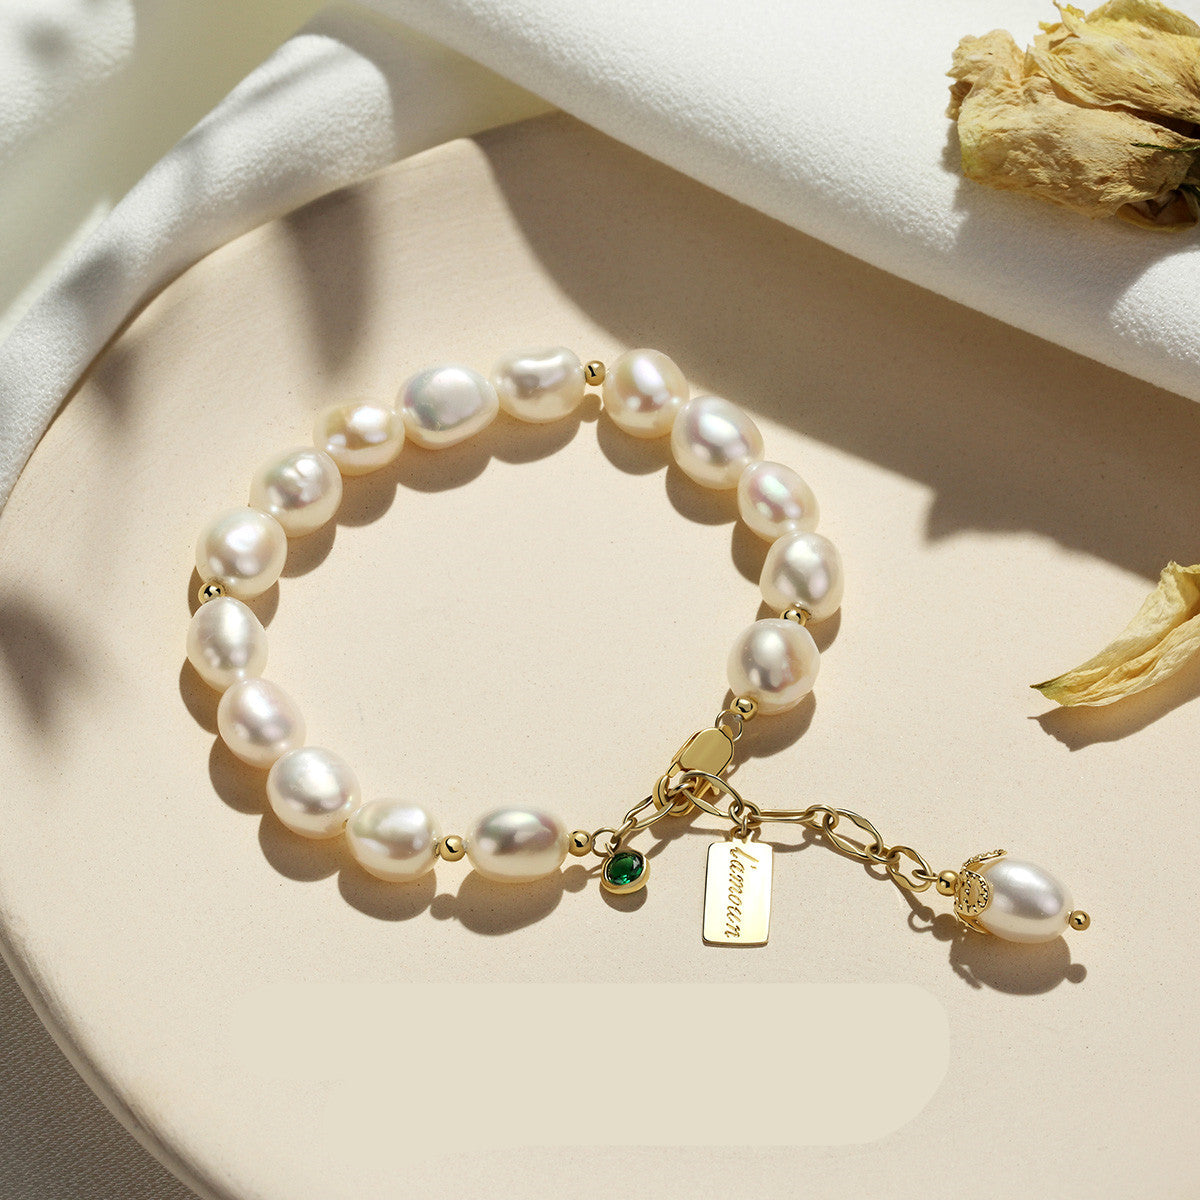 The Most beautiful and unique Natural Pearl Bracelet